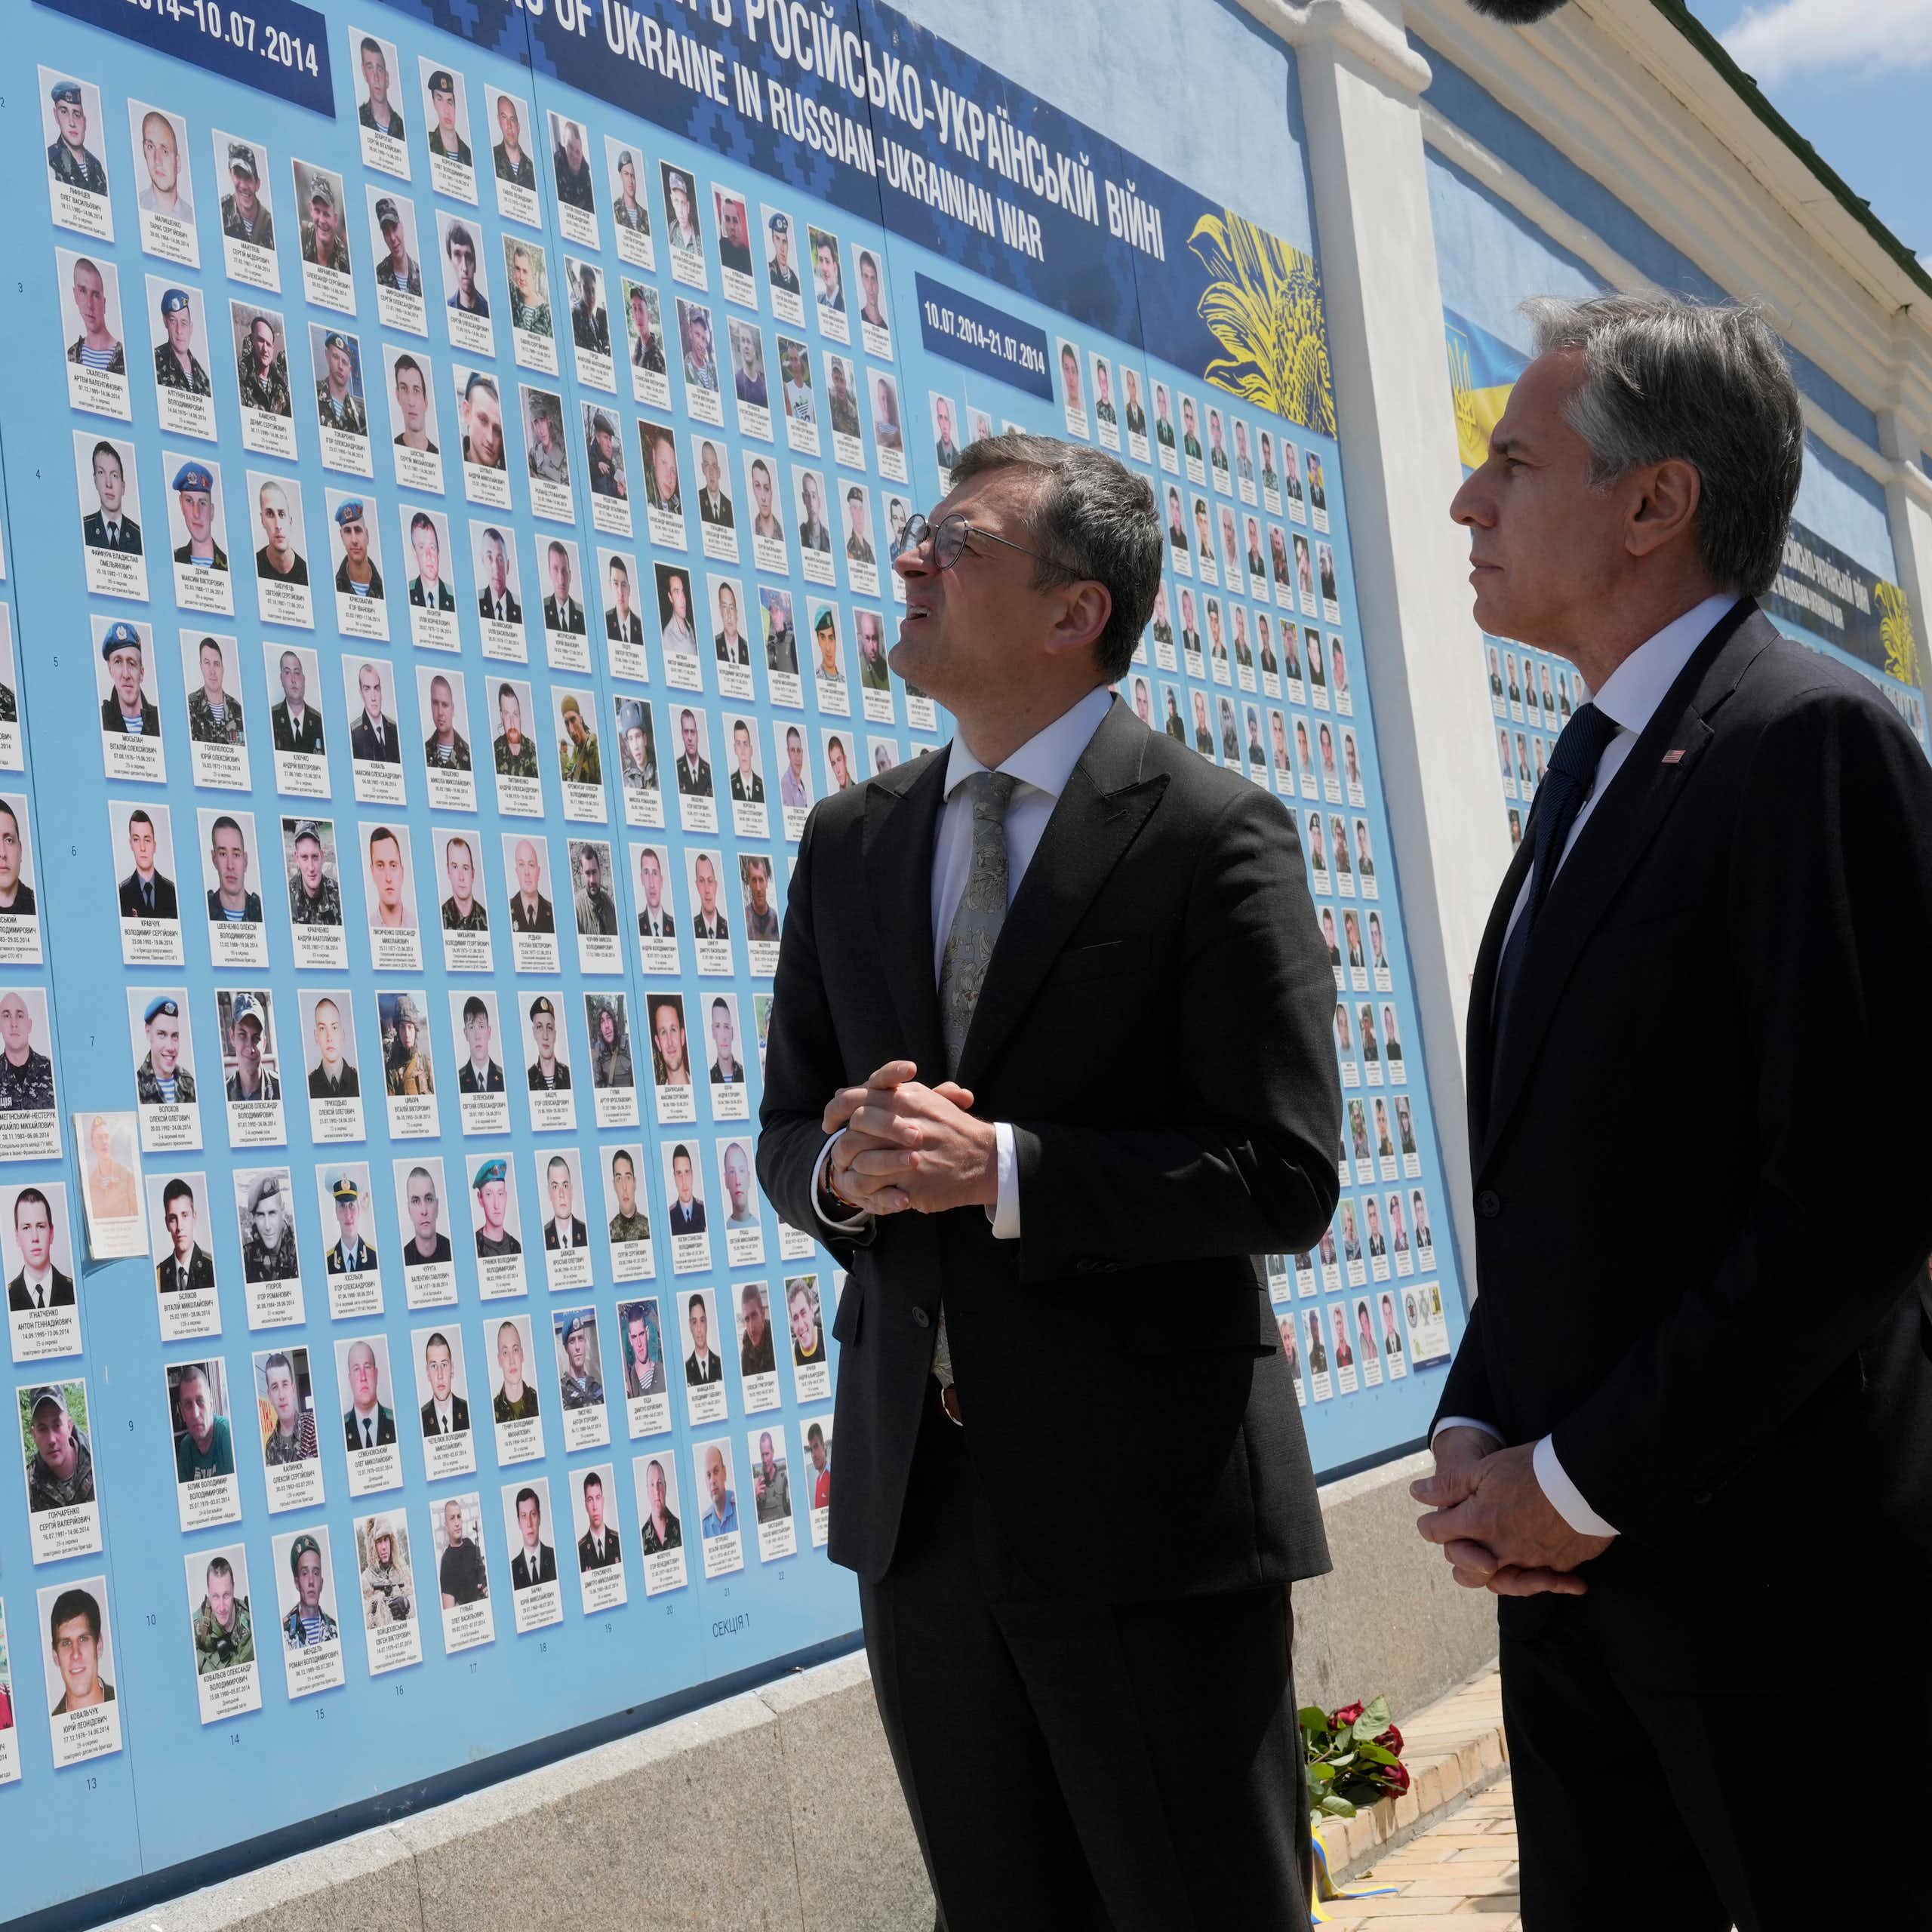 Two men in suits look at a large mural features the faces of fallen soldiers.